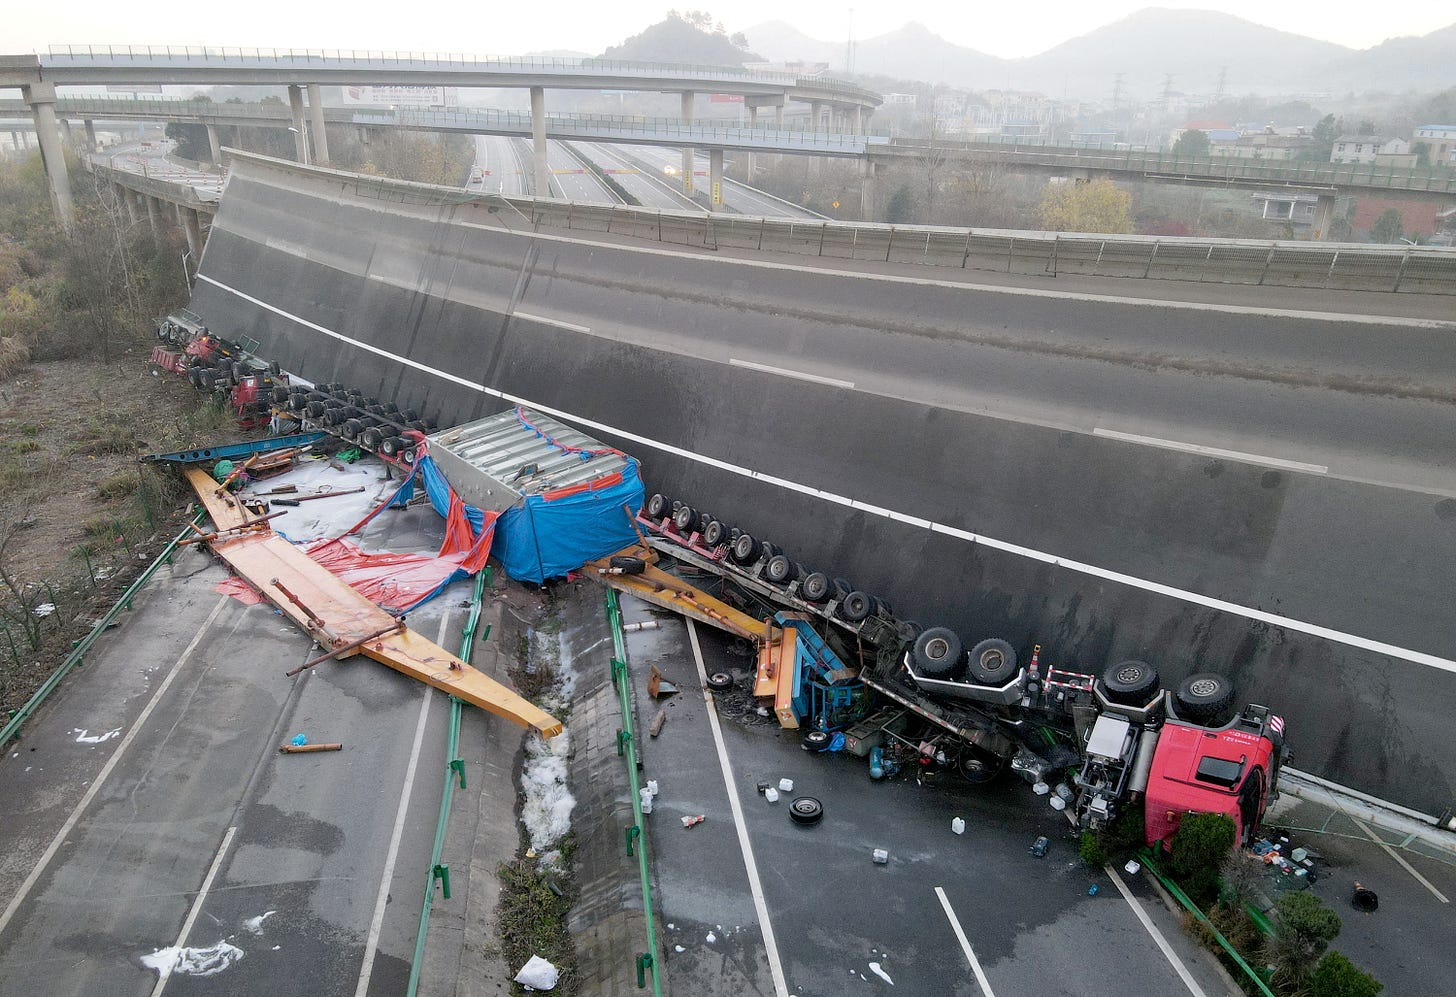 Four people killed in expressway bridge collapse in China's Hubei province  | Reuters